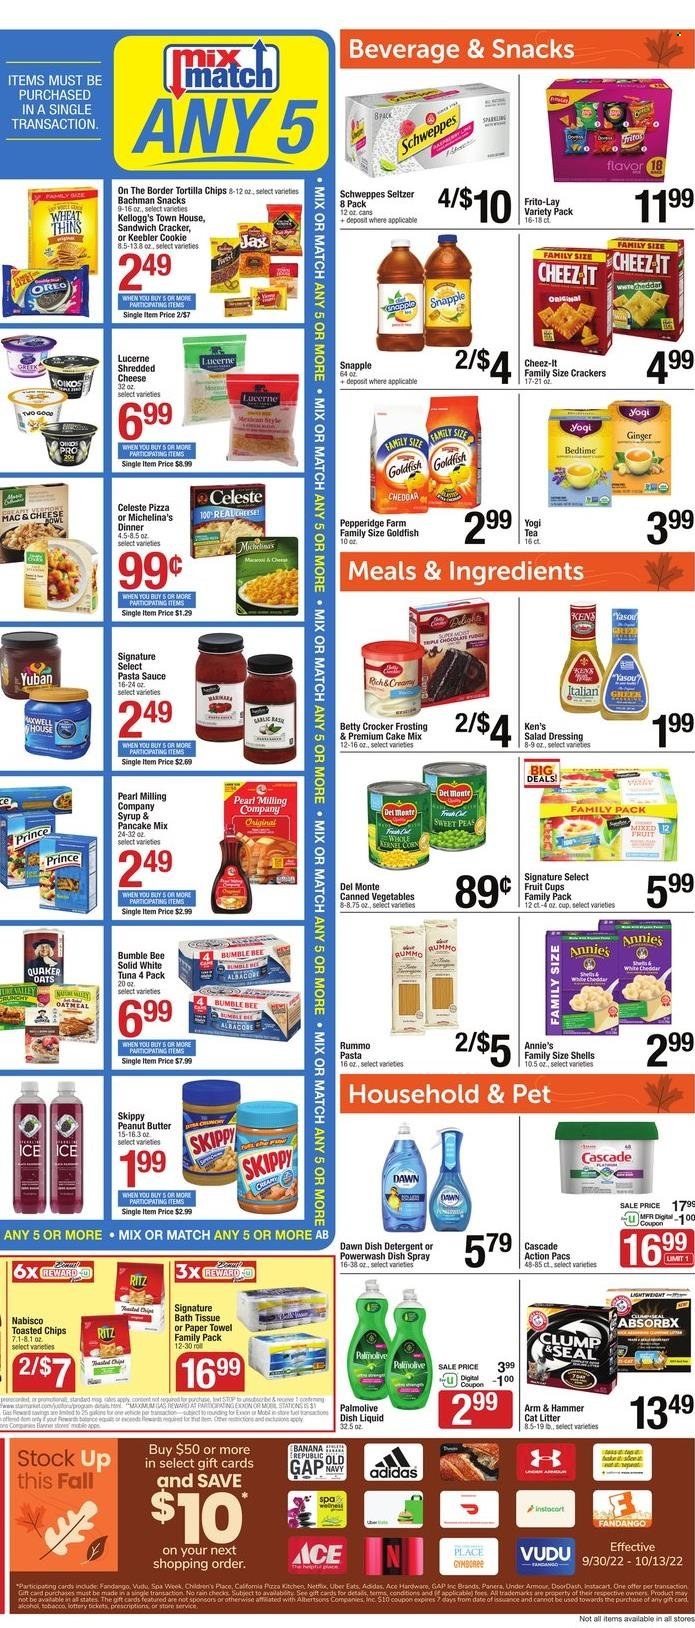 thumbnail - Shaw’s Flyer - 09/30/2022 - 10/06/2022 - Sales products - cake mix, corn, garlic, ginger, fruit cup, tuna, pizza, pasta sauce, sandwich, Bumble Bee, pancakes, Quaker, Annie's, shredded cheese, Oreo, Oikos, Celeste, chocolate, snack, crackers, Kellogg's, 7 Days, Keebler, RITZ, tortilla chips, chips, Thins, Goldfish, Frito-Lay, Cheez-It, ARM & HAMMER, frosting, oatmeal, oats, canned vegetables, Del Monte, salad dressing, dressing, peanut butter, syrup, Schweppes, Snapple, seltzer water, Maxwell House, tea, bath tissue, paper towels, detergent, Cascade, dishwashing liquid, dishwasher cleaner, Adidas, Palmolive. Page 3.